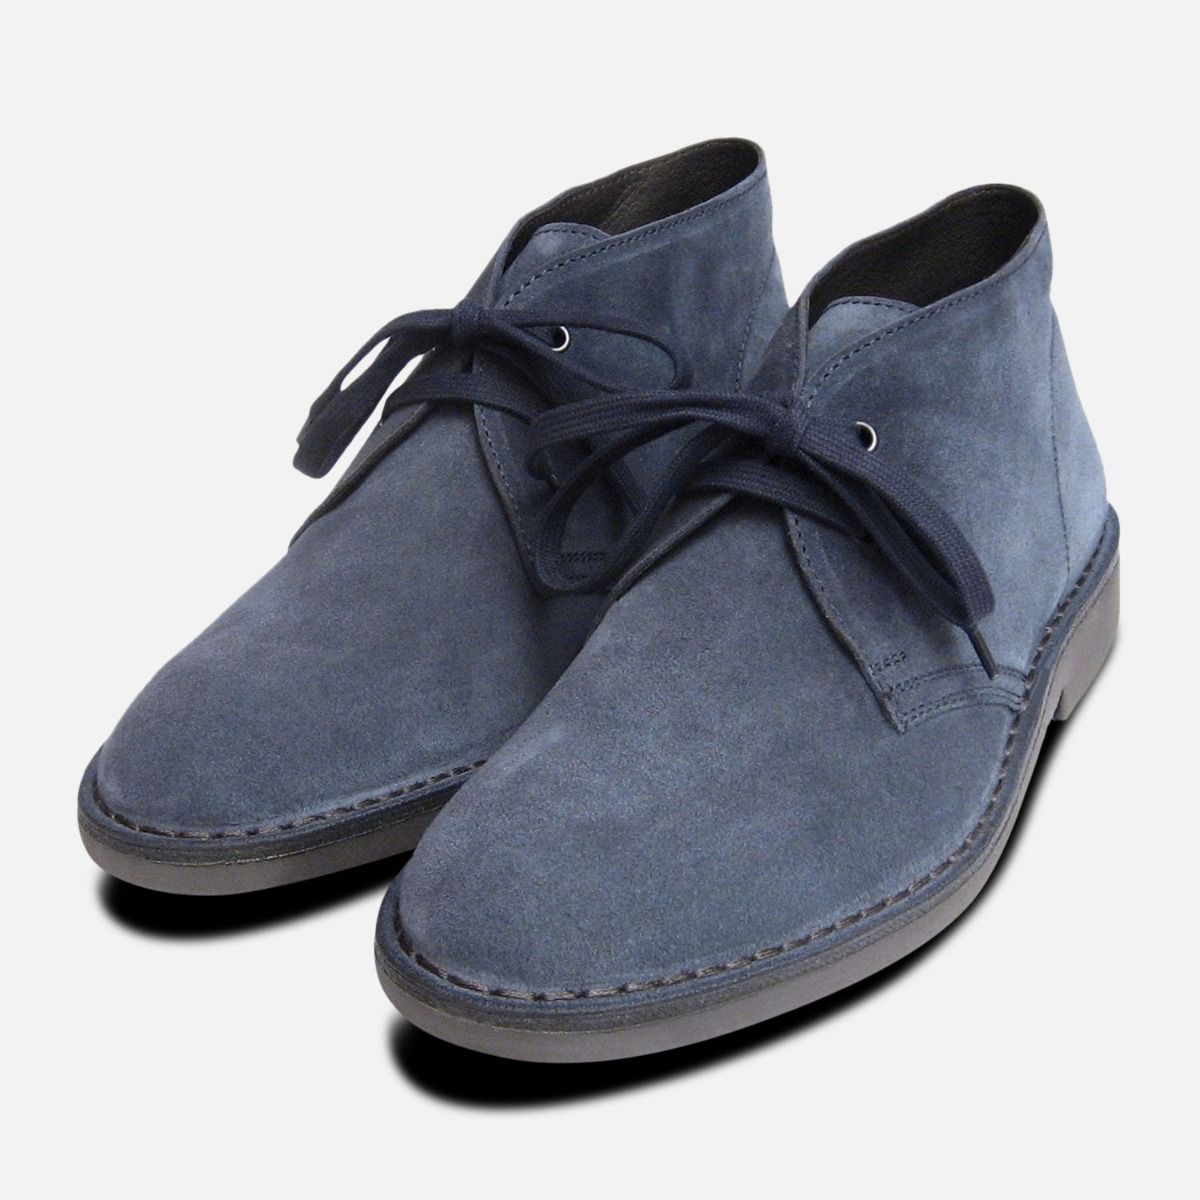 blue suede shoes with jeans